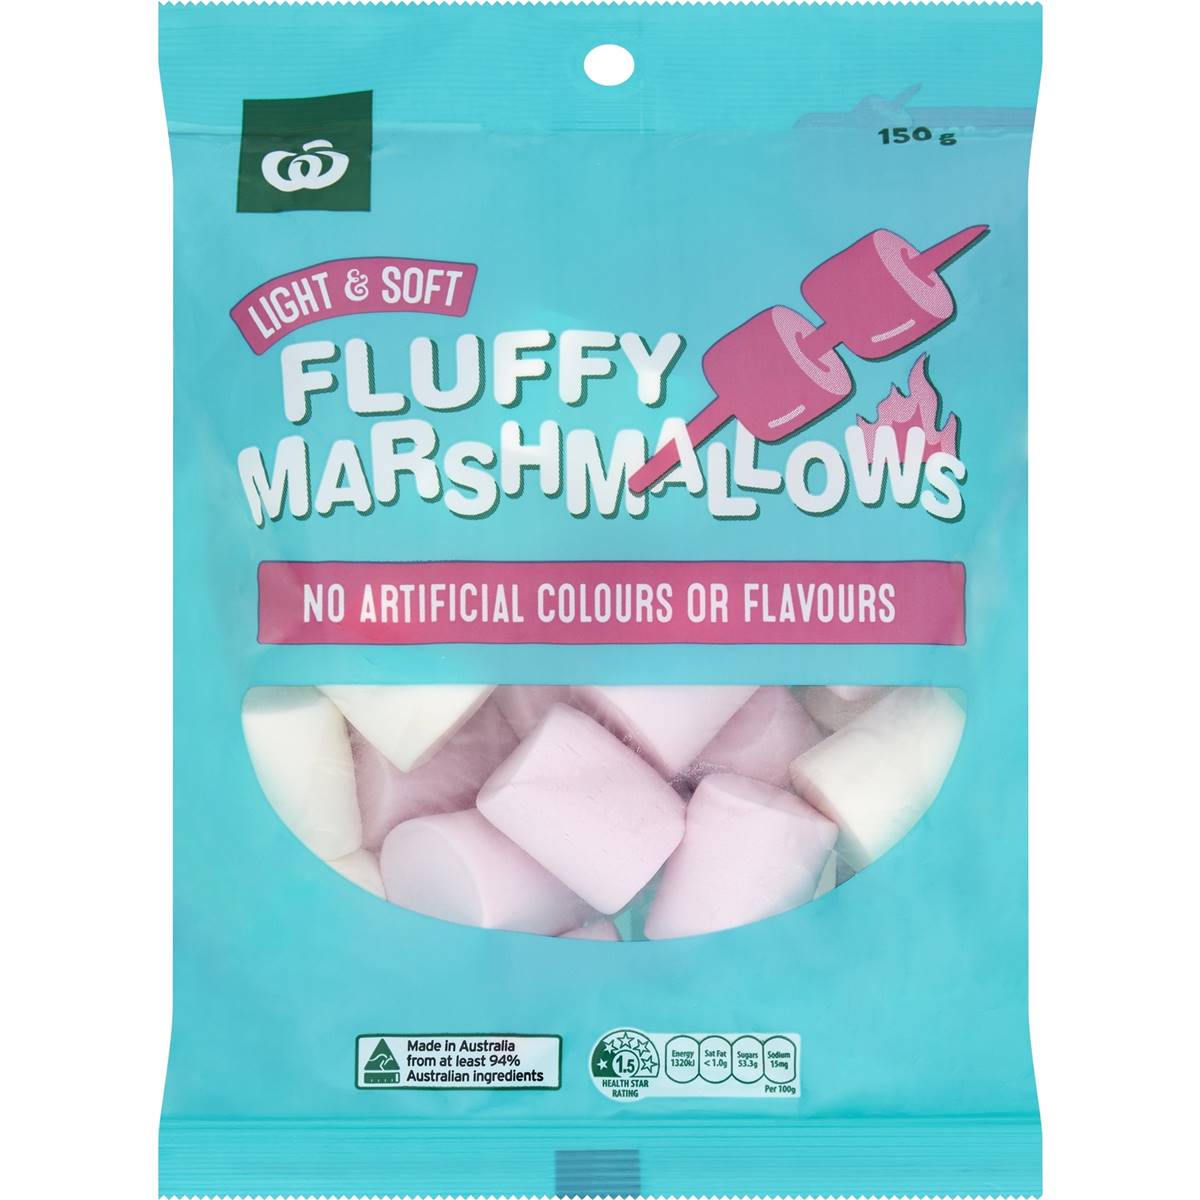 Calories in Woolworths Marshmallows